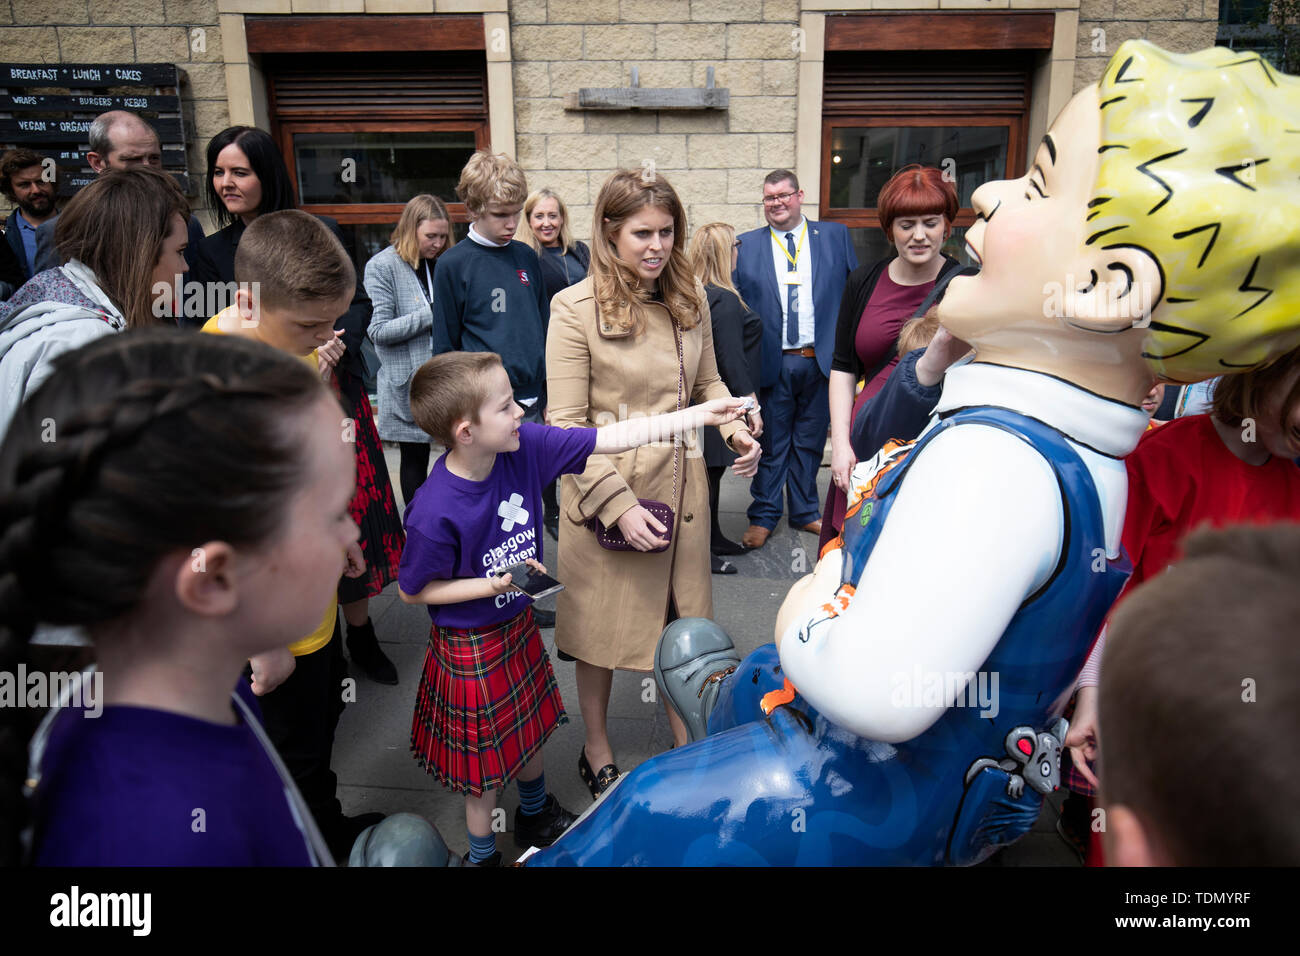 Princess Beatrice joins children from Scotland's children's hospital charities as she takes part in the Oor Wullie's Big Bucket Trail to find one of several life-sized sculptures of the favourite comic book character on a public art trail in Edinburgh city centre. Stock Photo